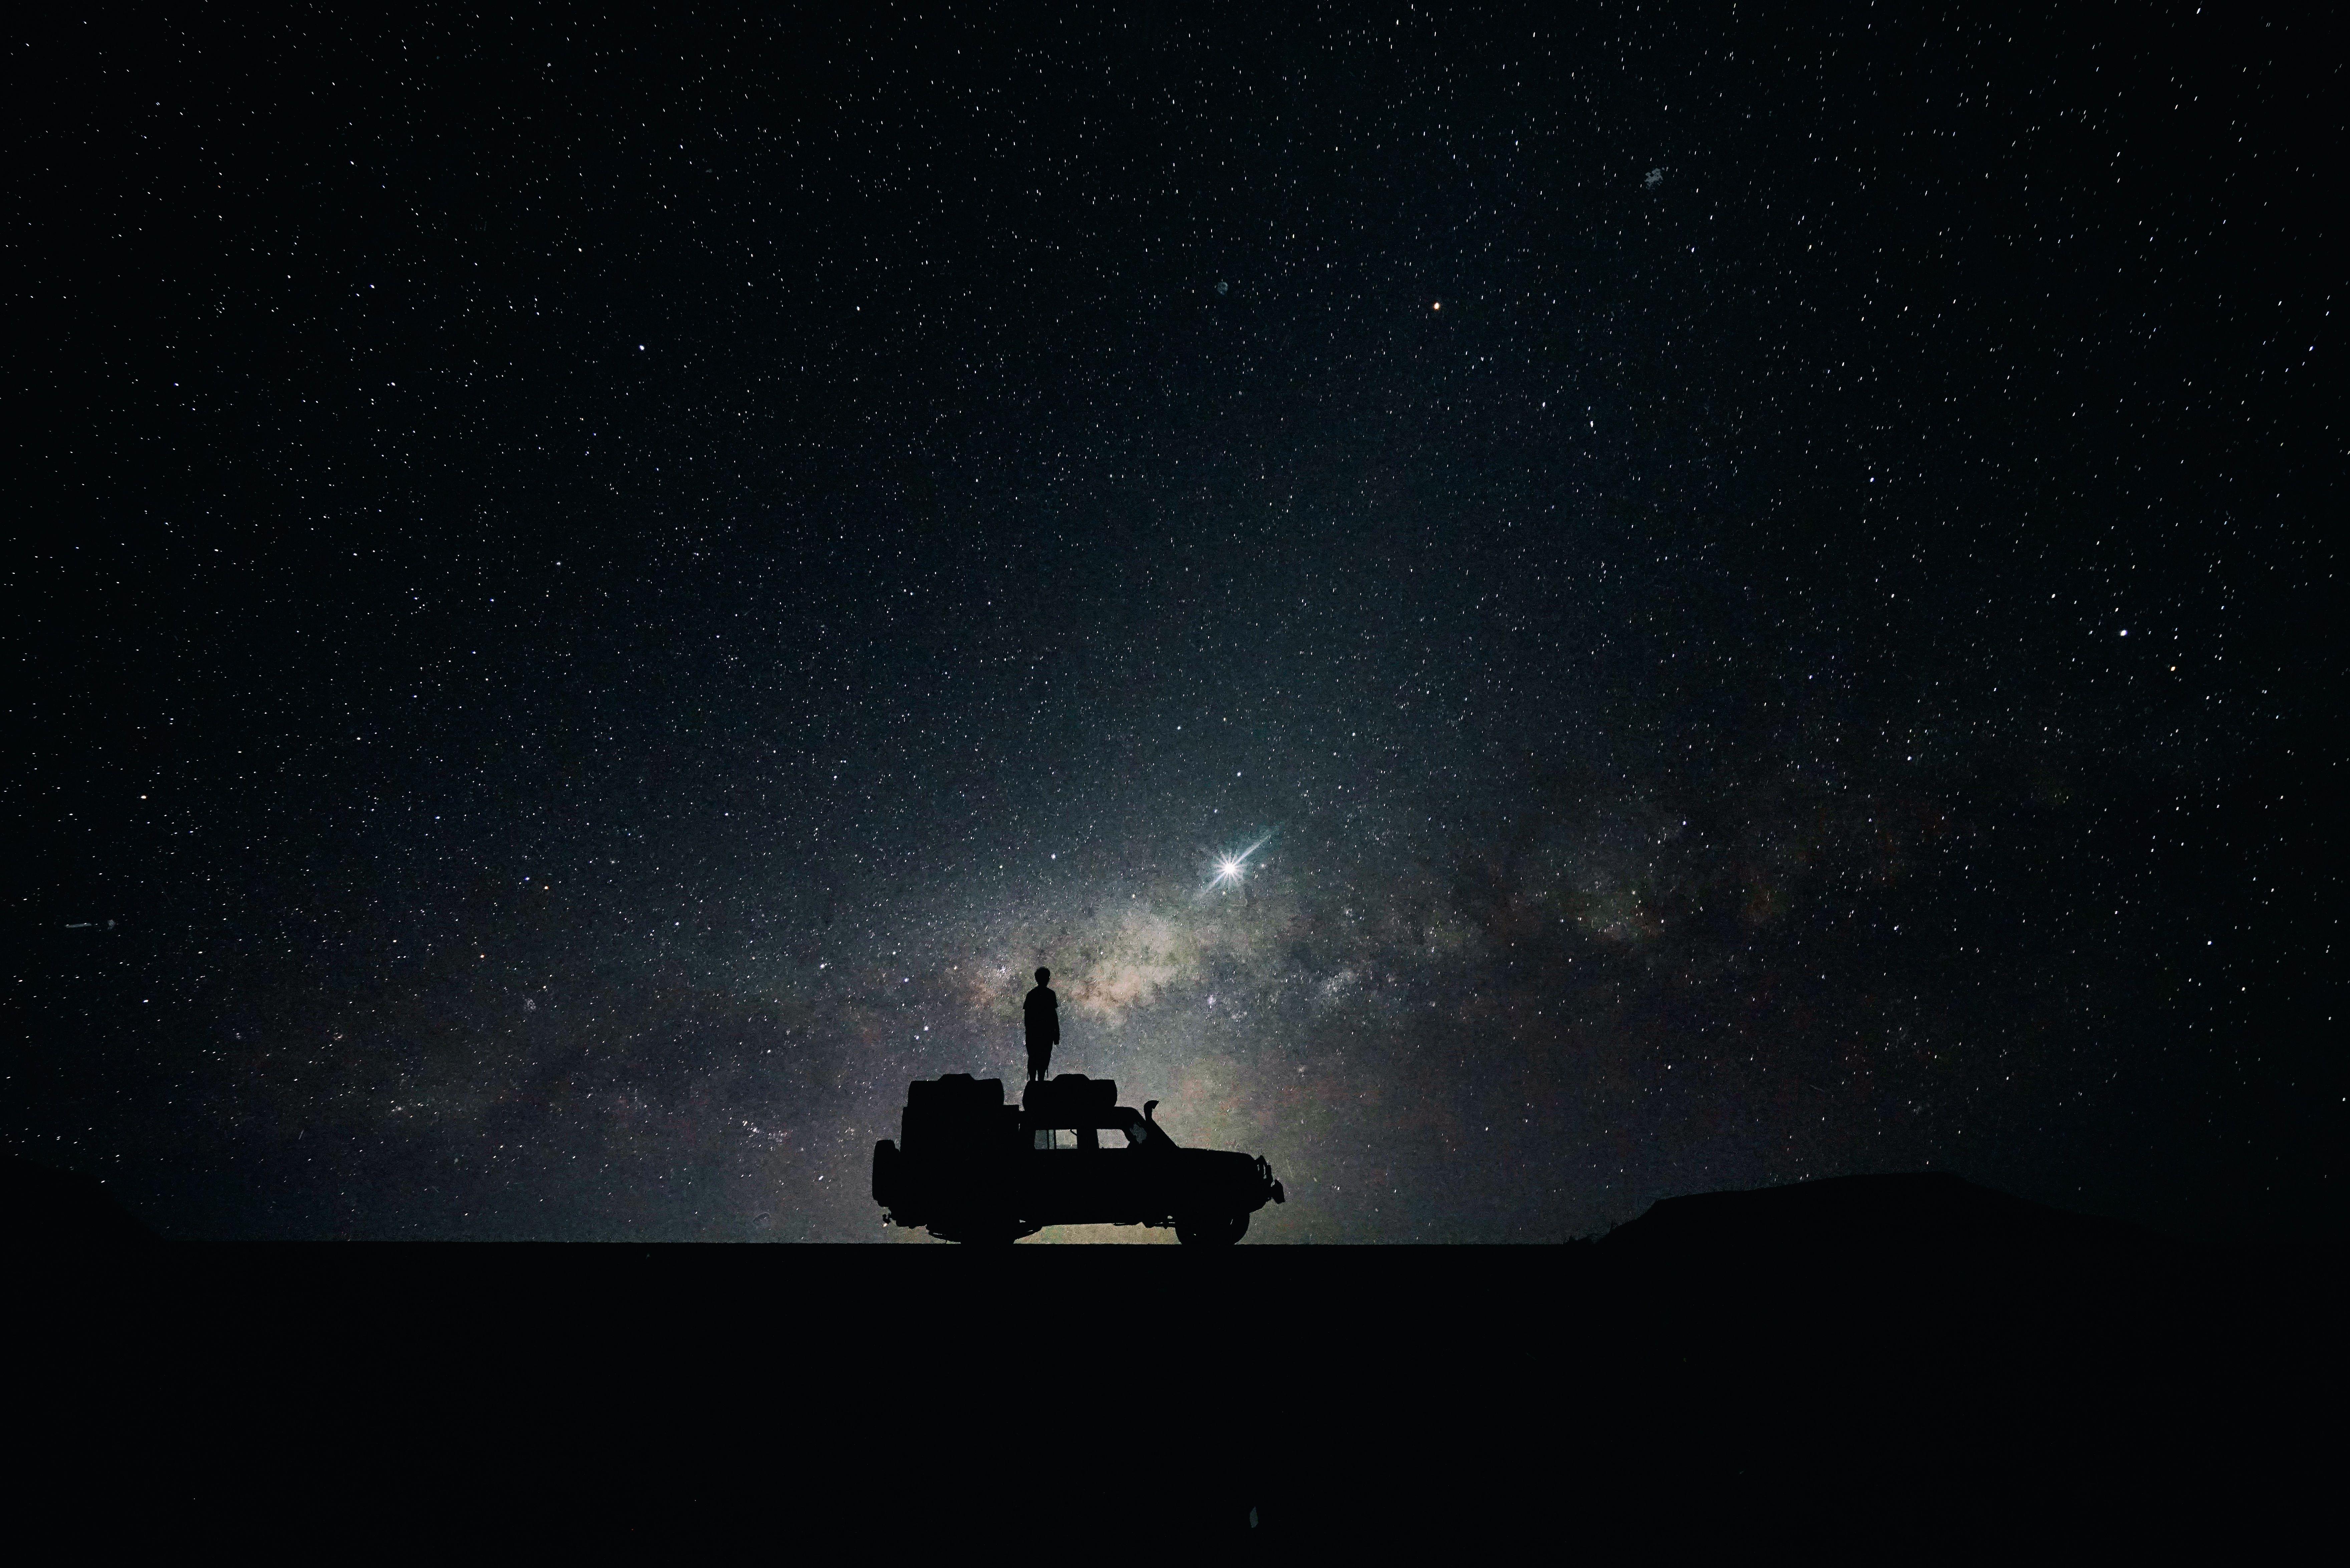 Download wallpaper 7042x4699 stars, sky, space, car HD background